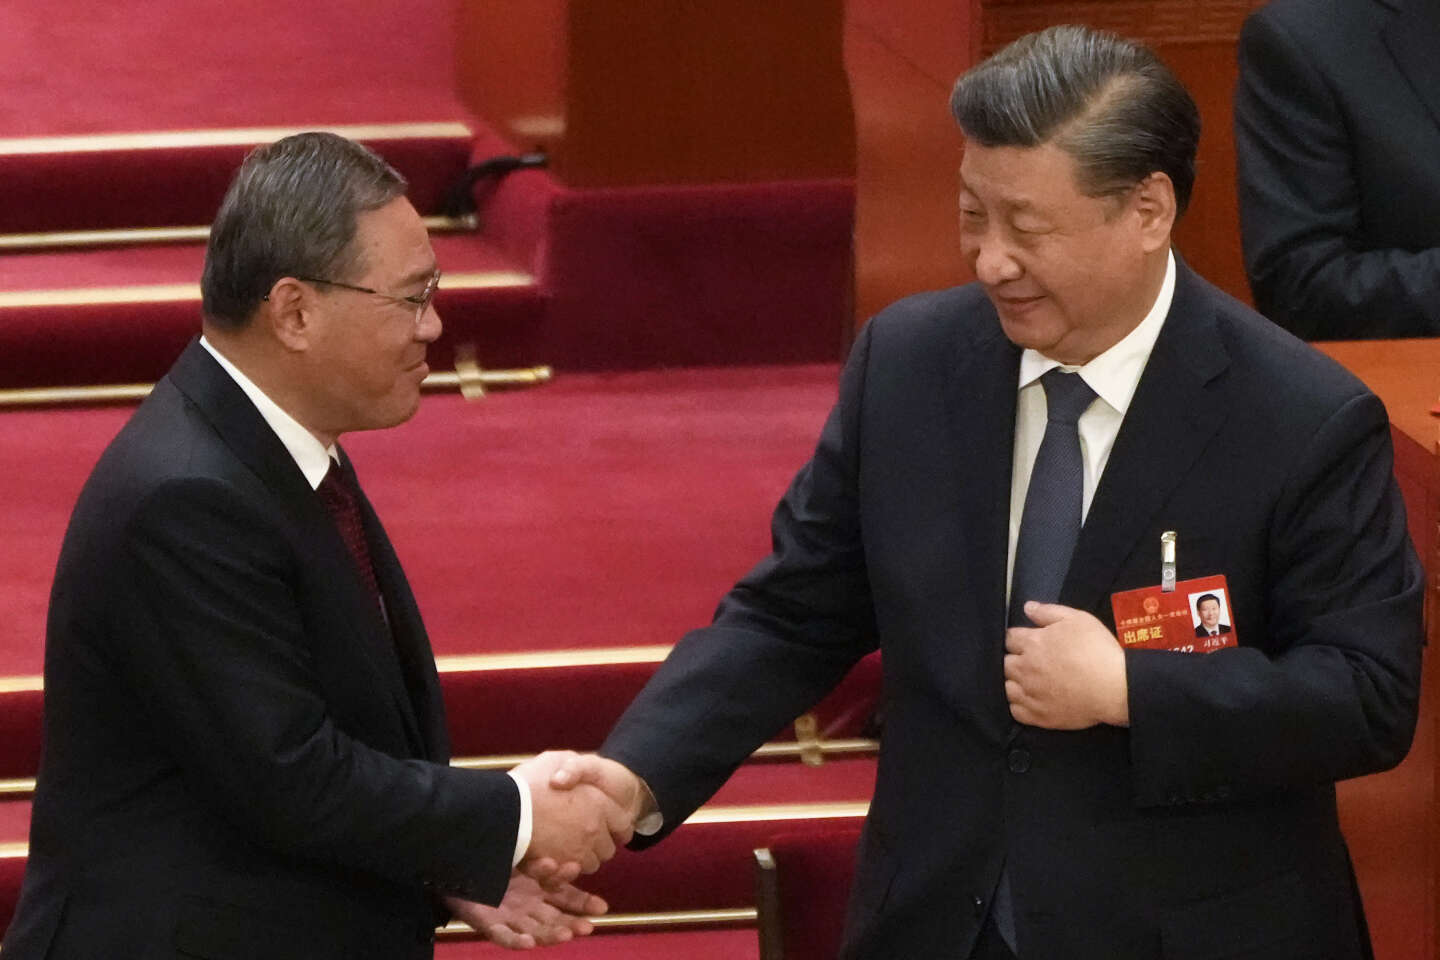 Li Qiang was appointed Prime Minister of China